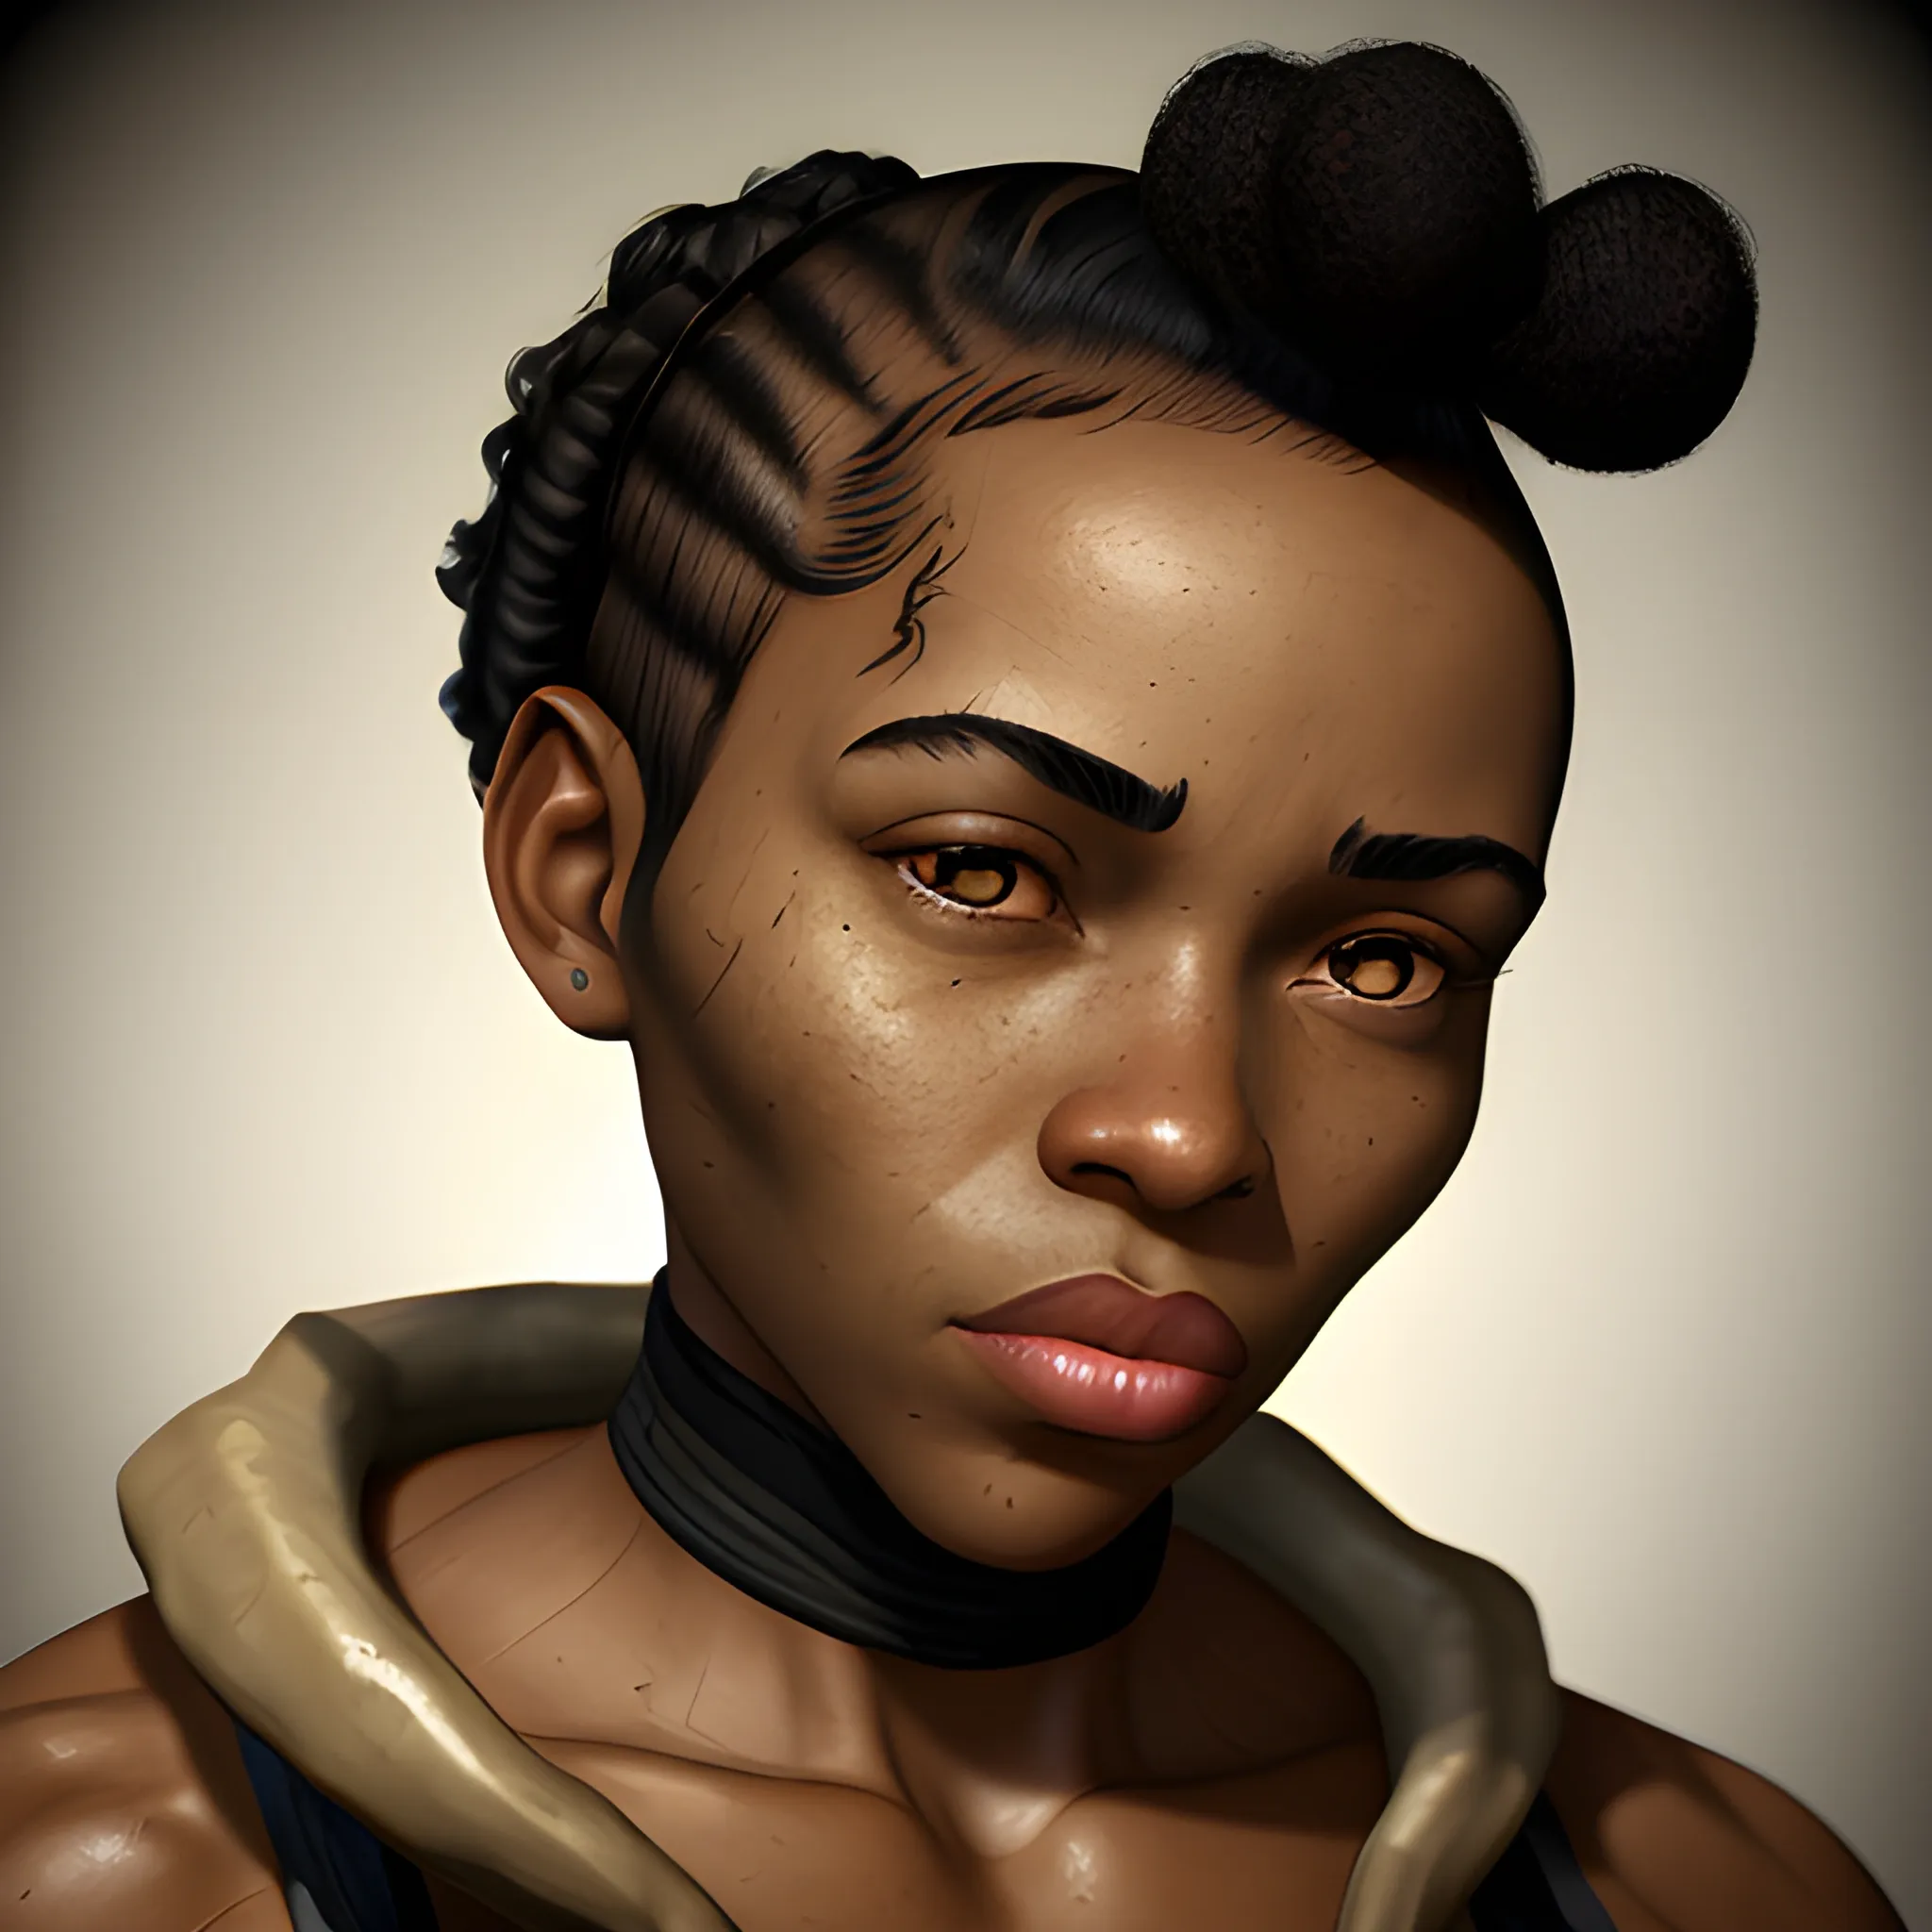 In the style of fallout 1, (masterpiece), (portrait photography), (portrait of an adult African-American feminine male), no makeup, flat chested, white sports bra, bun hairstyle, black curly hair, black hair, brown eyes, sloped shoulders, fit body, full lips, strong jaw, round button nose